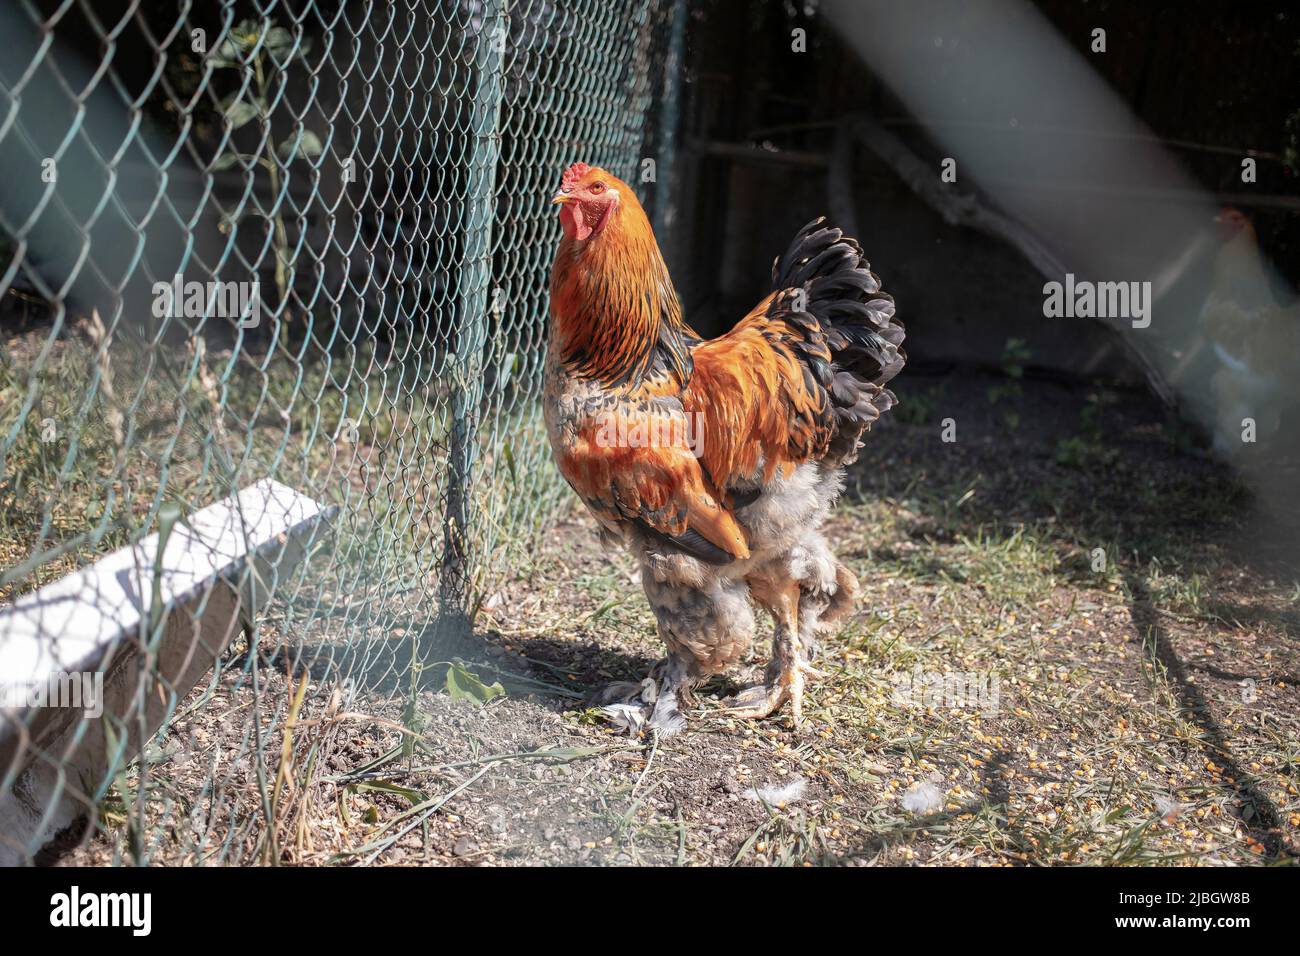 Domestic chicken in a village household coop Stock Photo